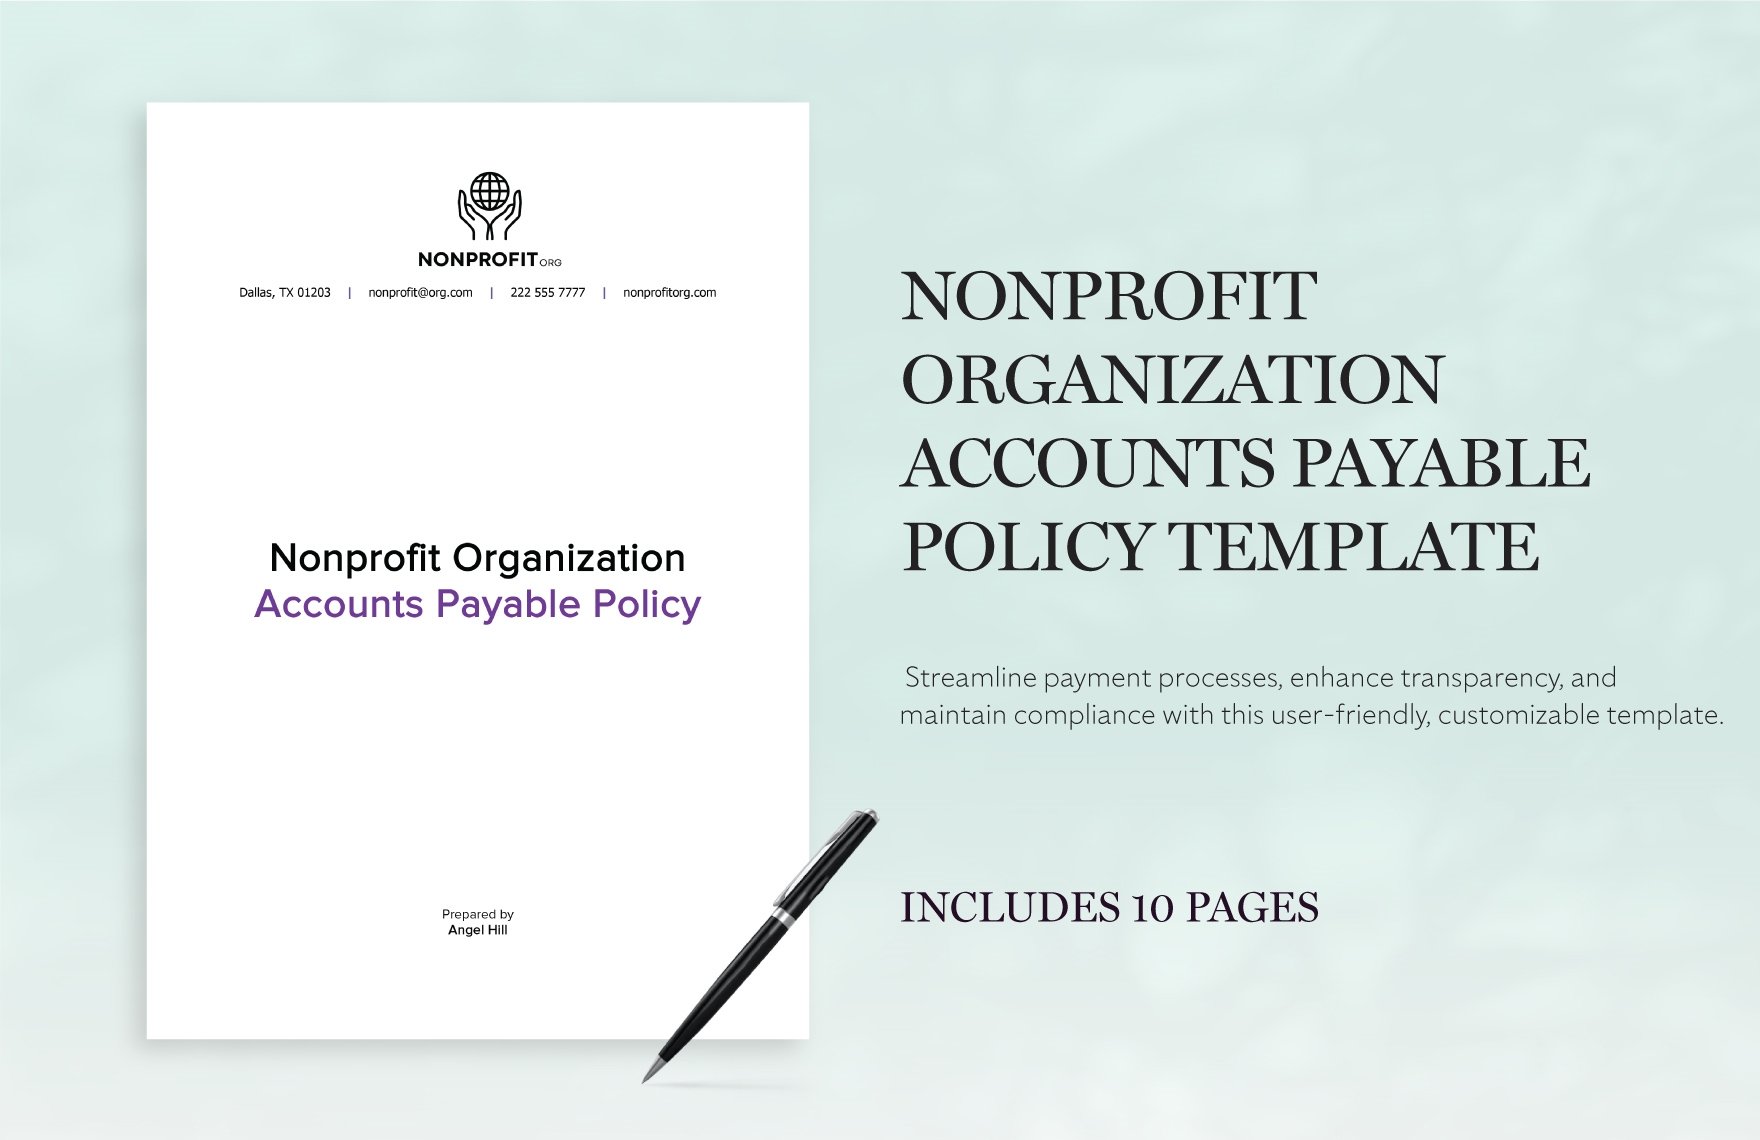 Nonprofit Organization Accounts Payable Policy Template in Word, Google Docs, PDF, PNG